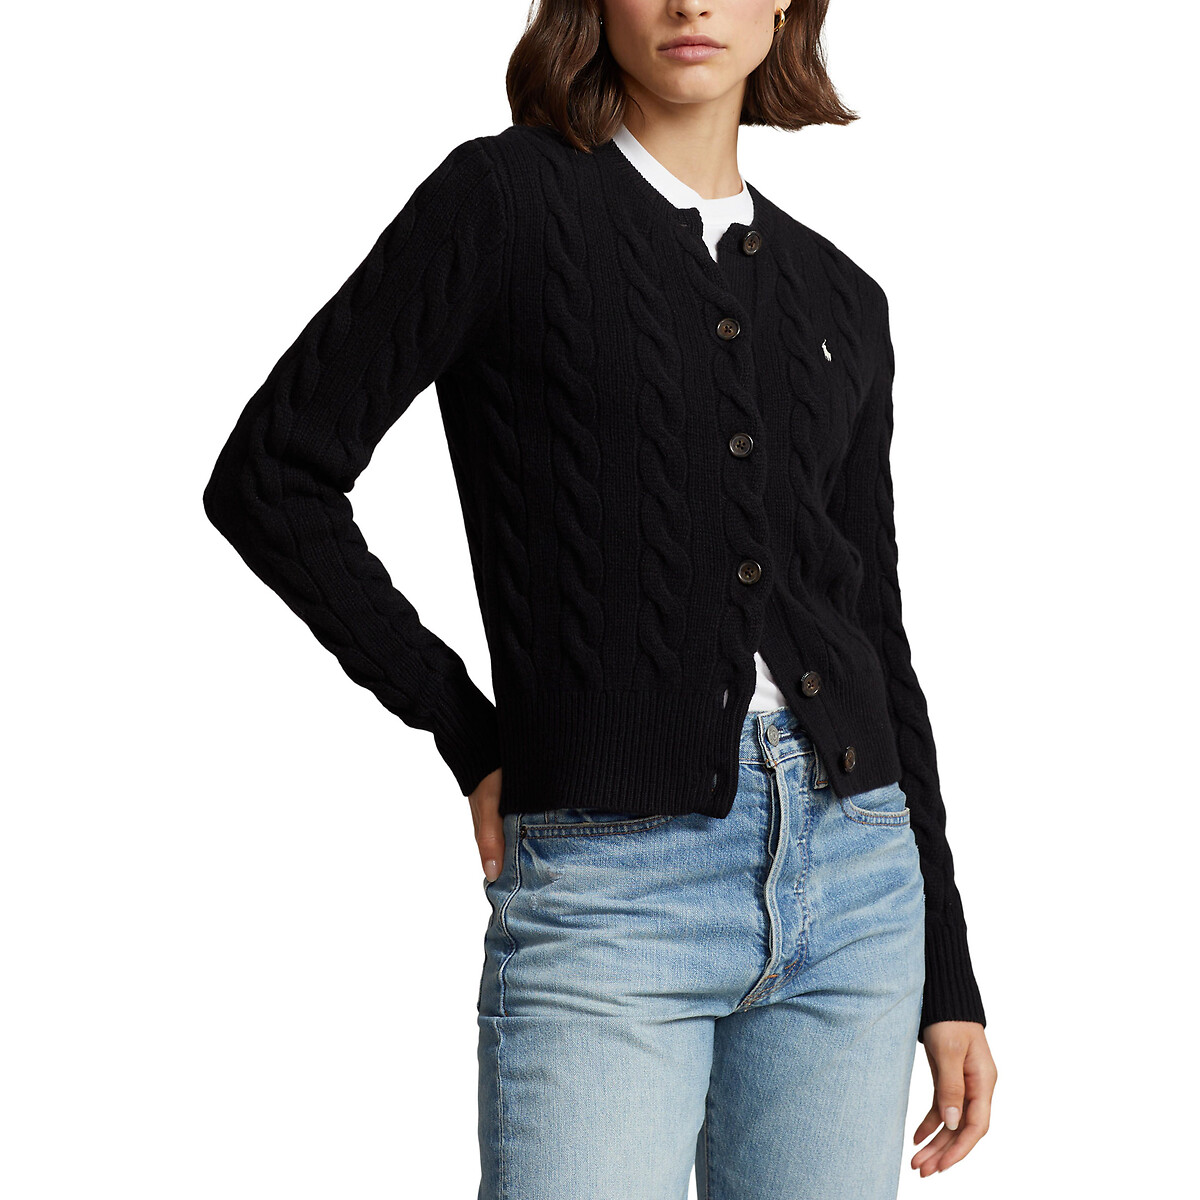 Wool/Cashmere Buttoned Cardigan in Cable Knit with Crew Neck